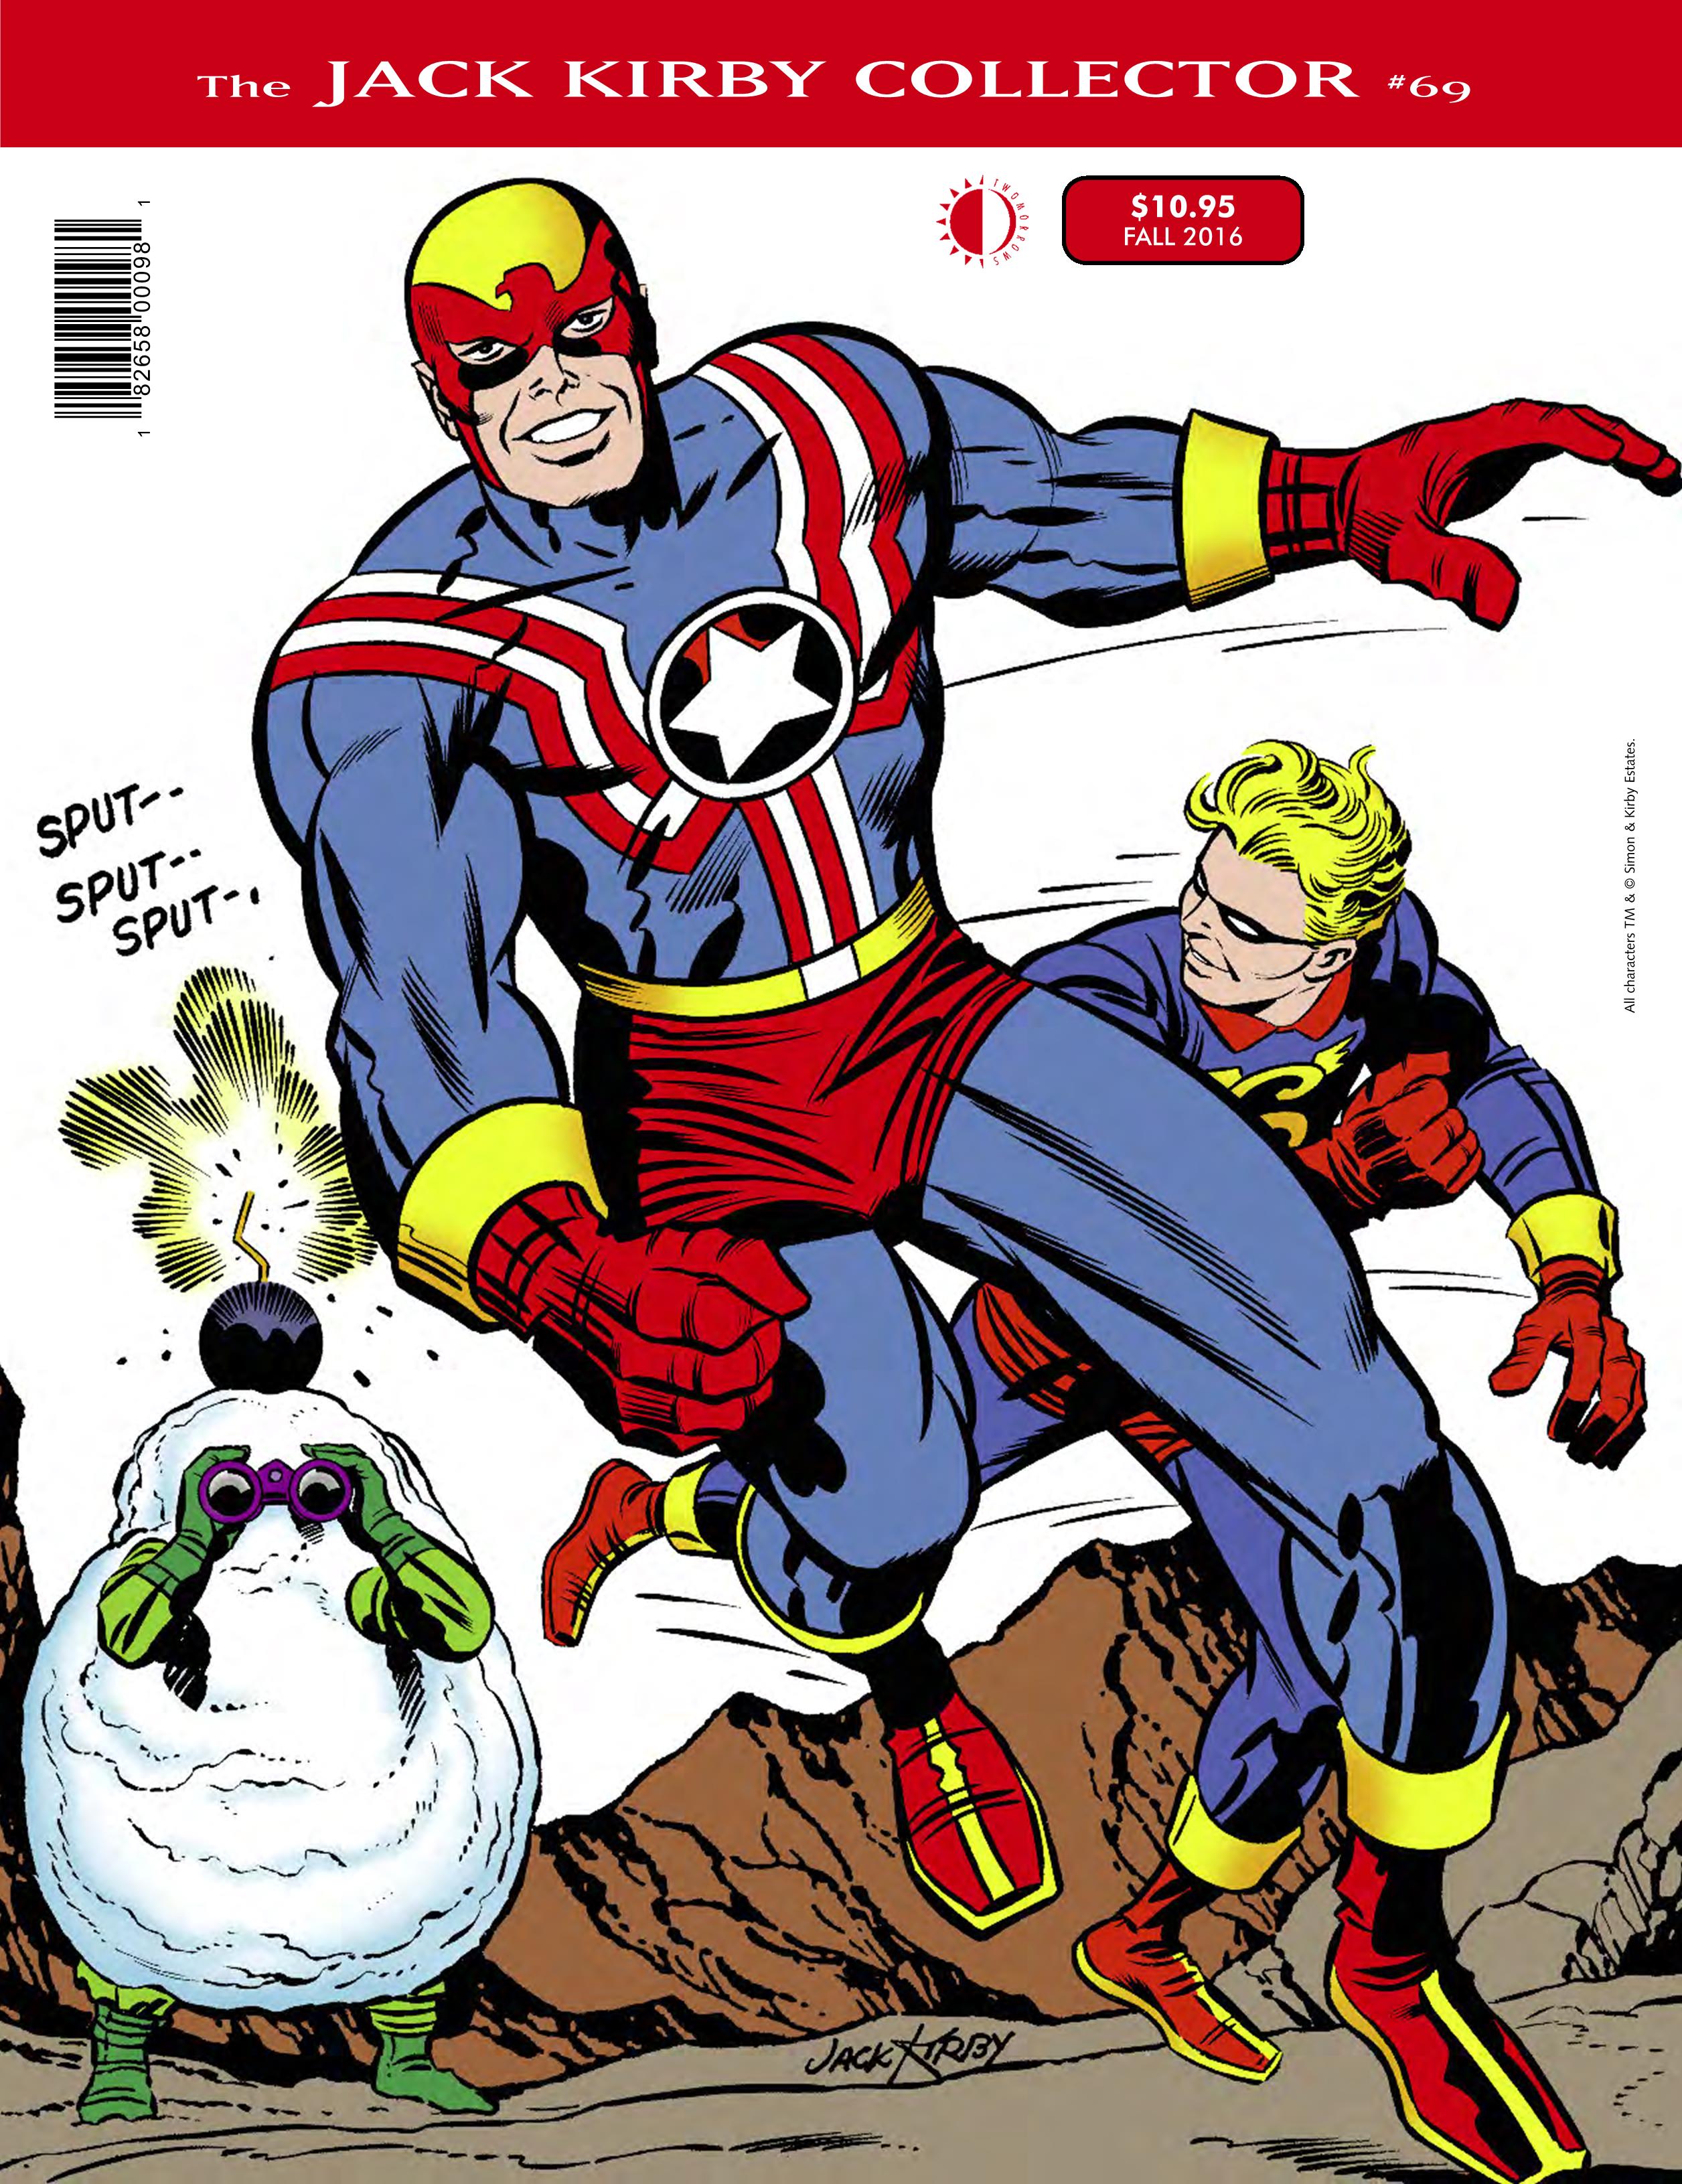 Read online The Jack Kirby Collector comic -  Issue #69 - 1